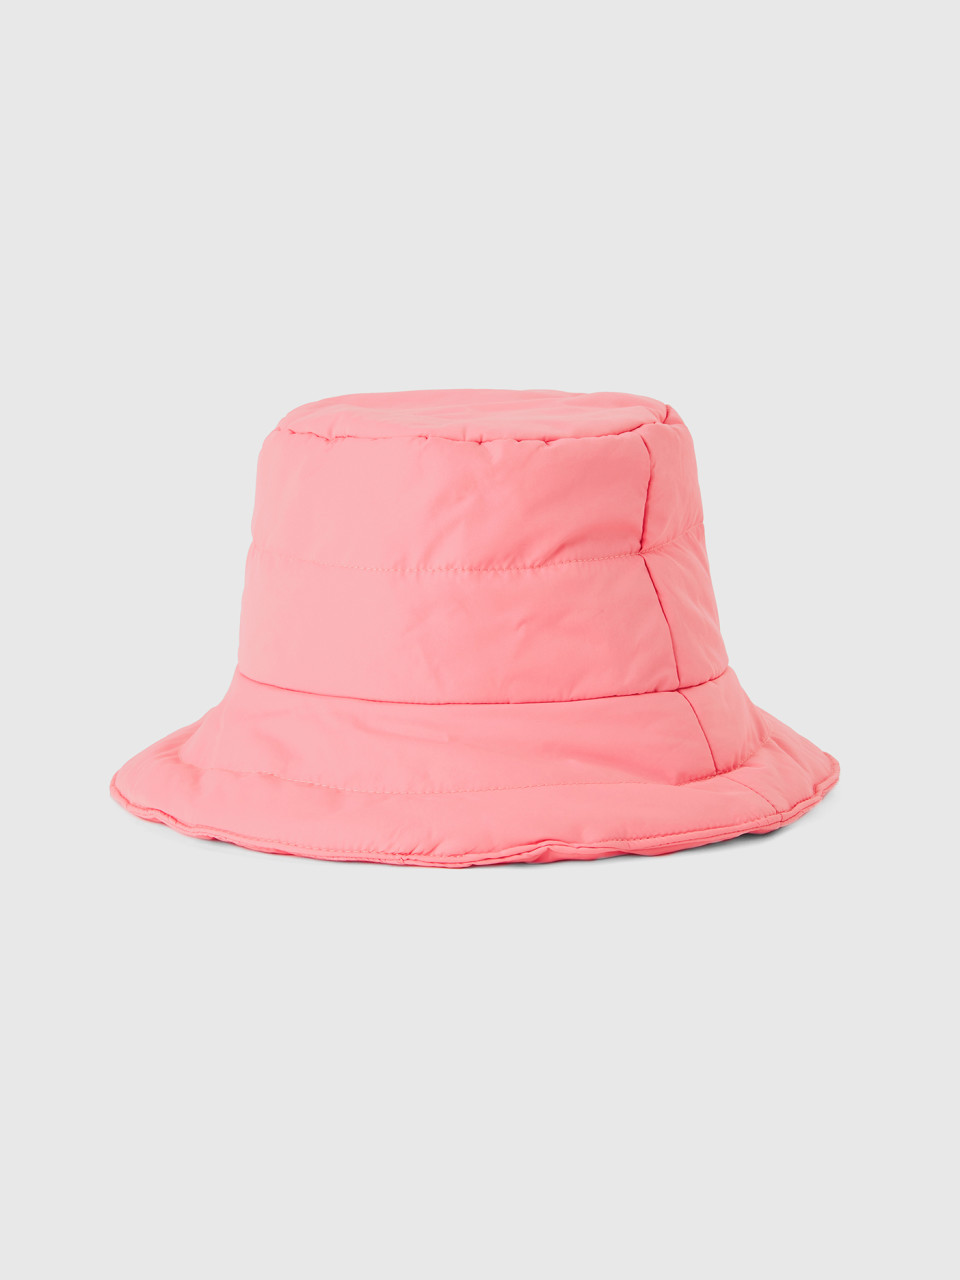 Benetton, Quilted Padded Hat, Pink, Women